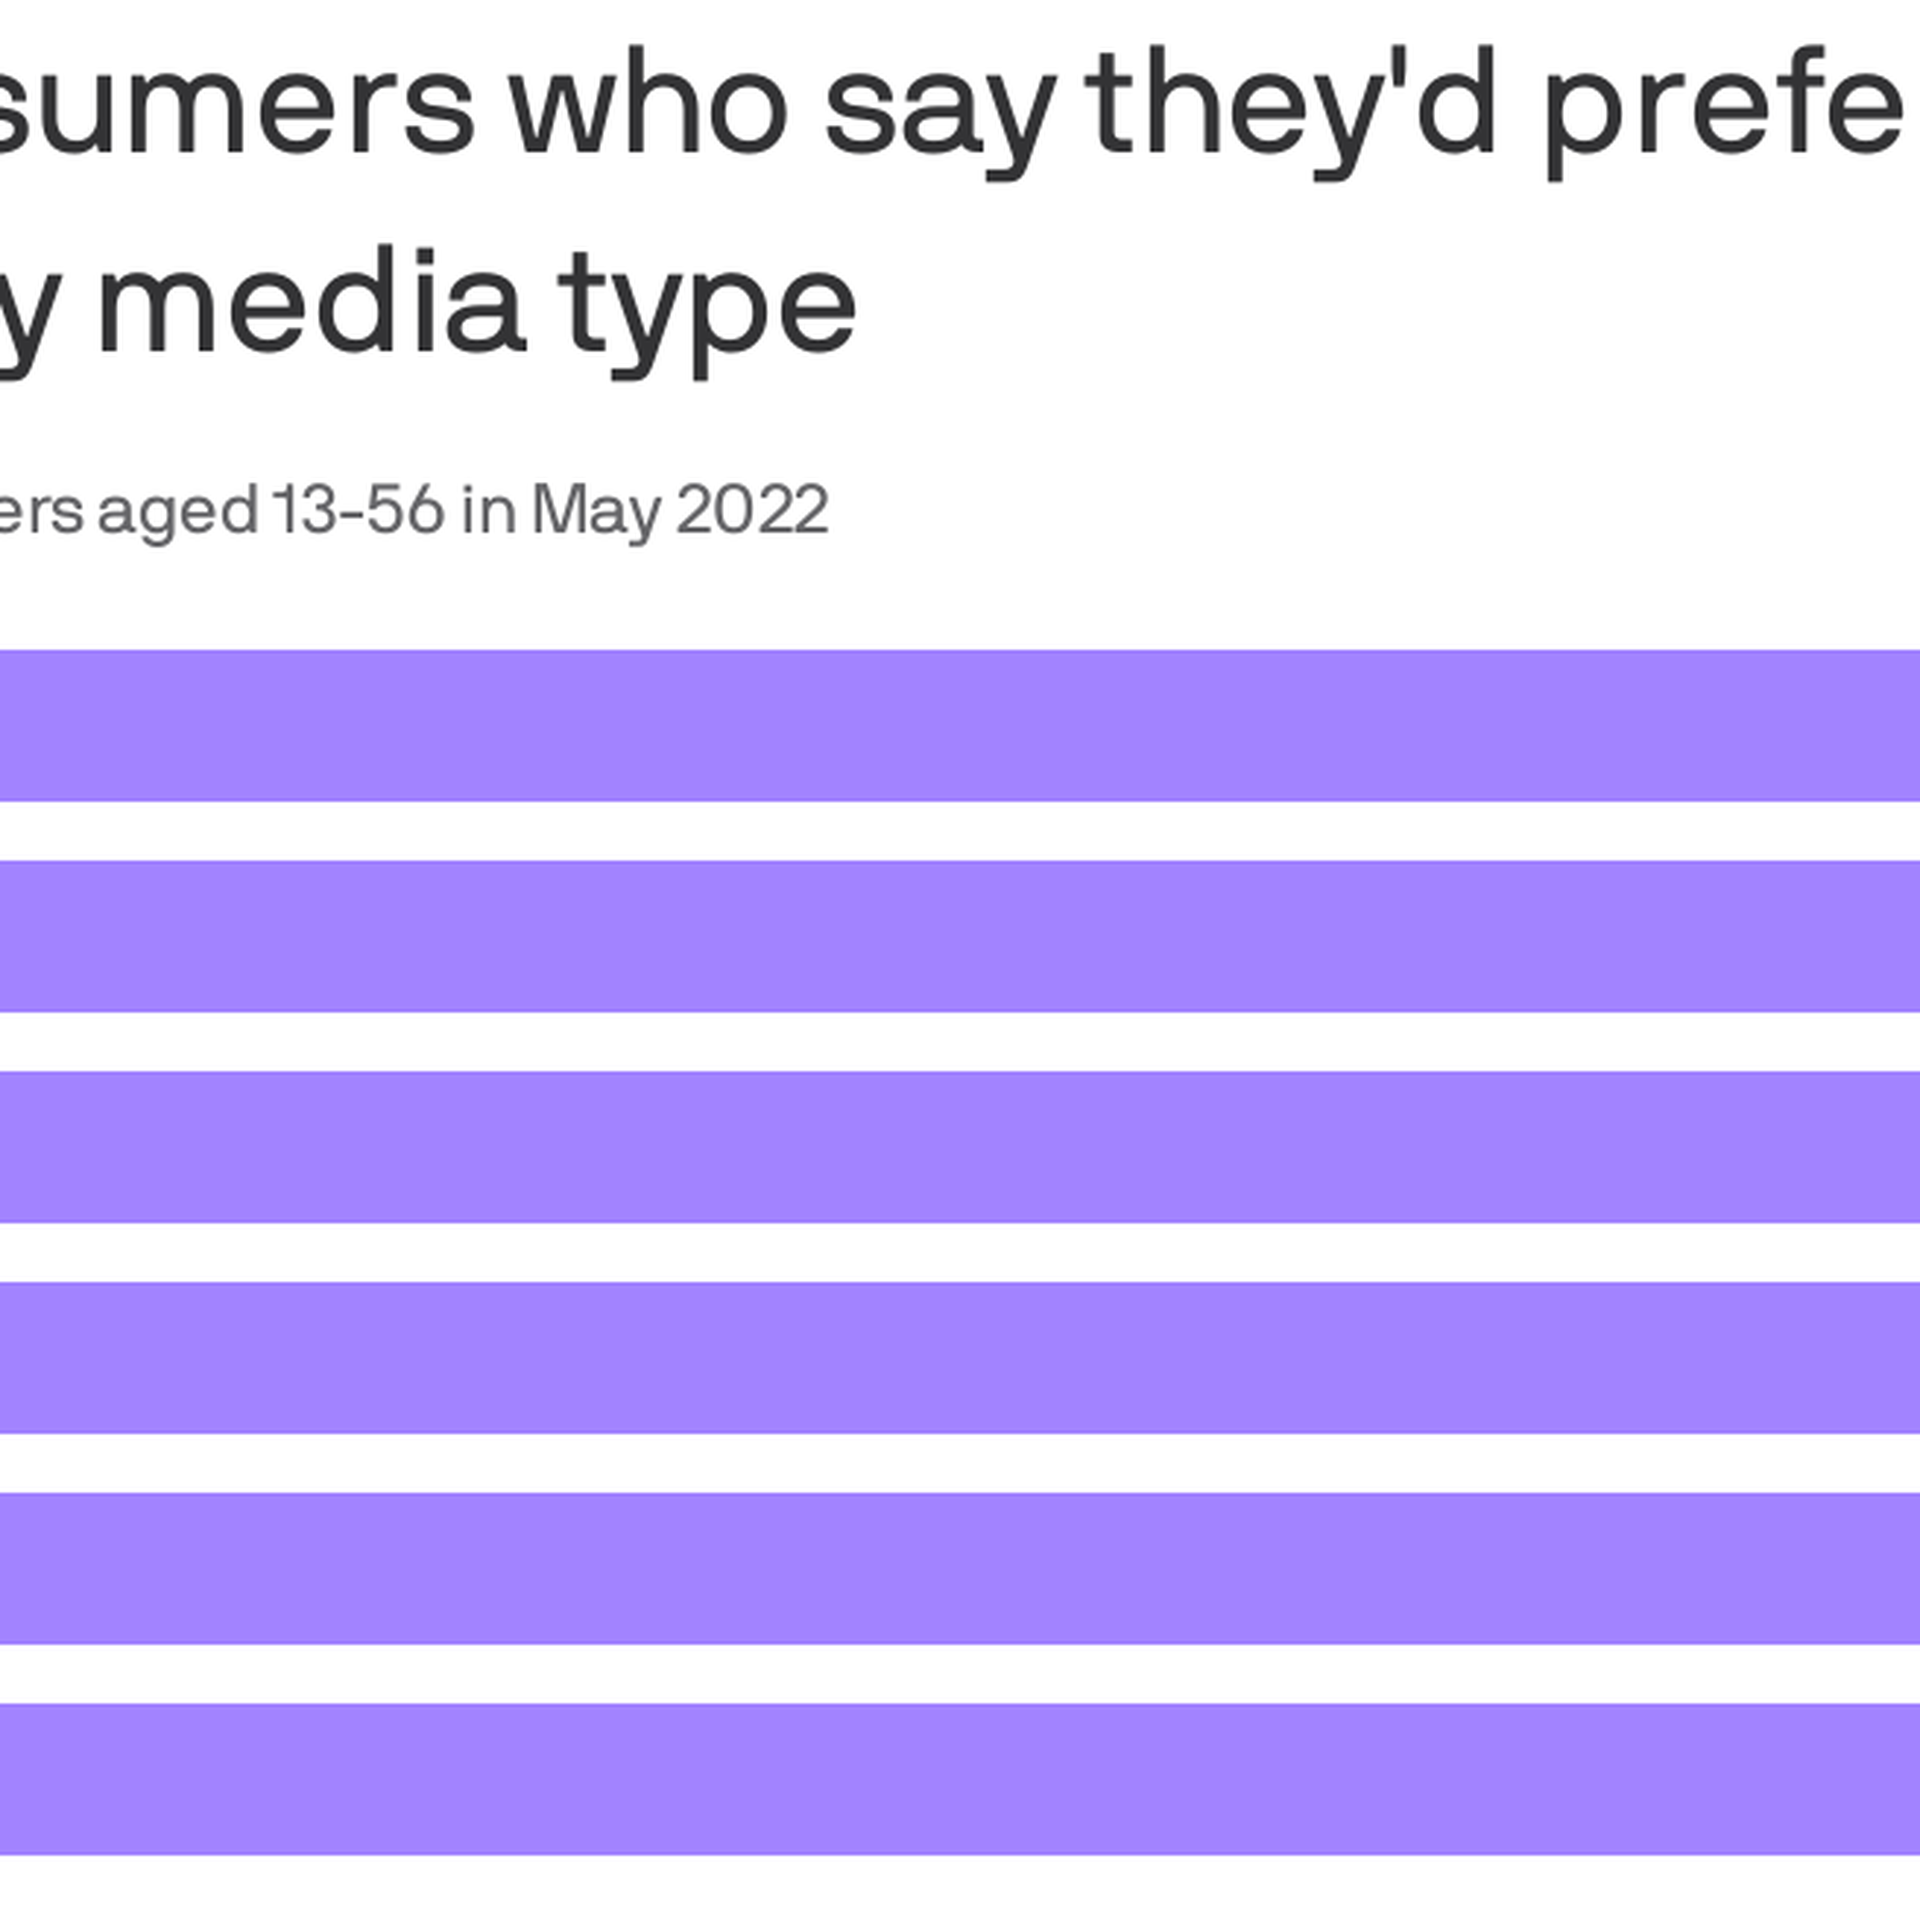 Share of consumers who say they'd prefer to see franchises in the metaverse, by media type